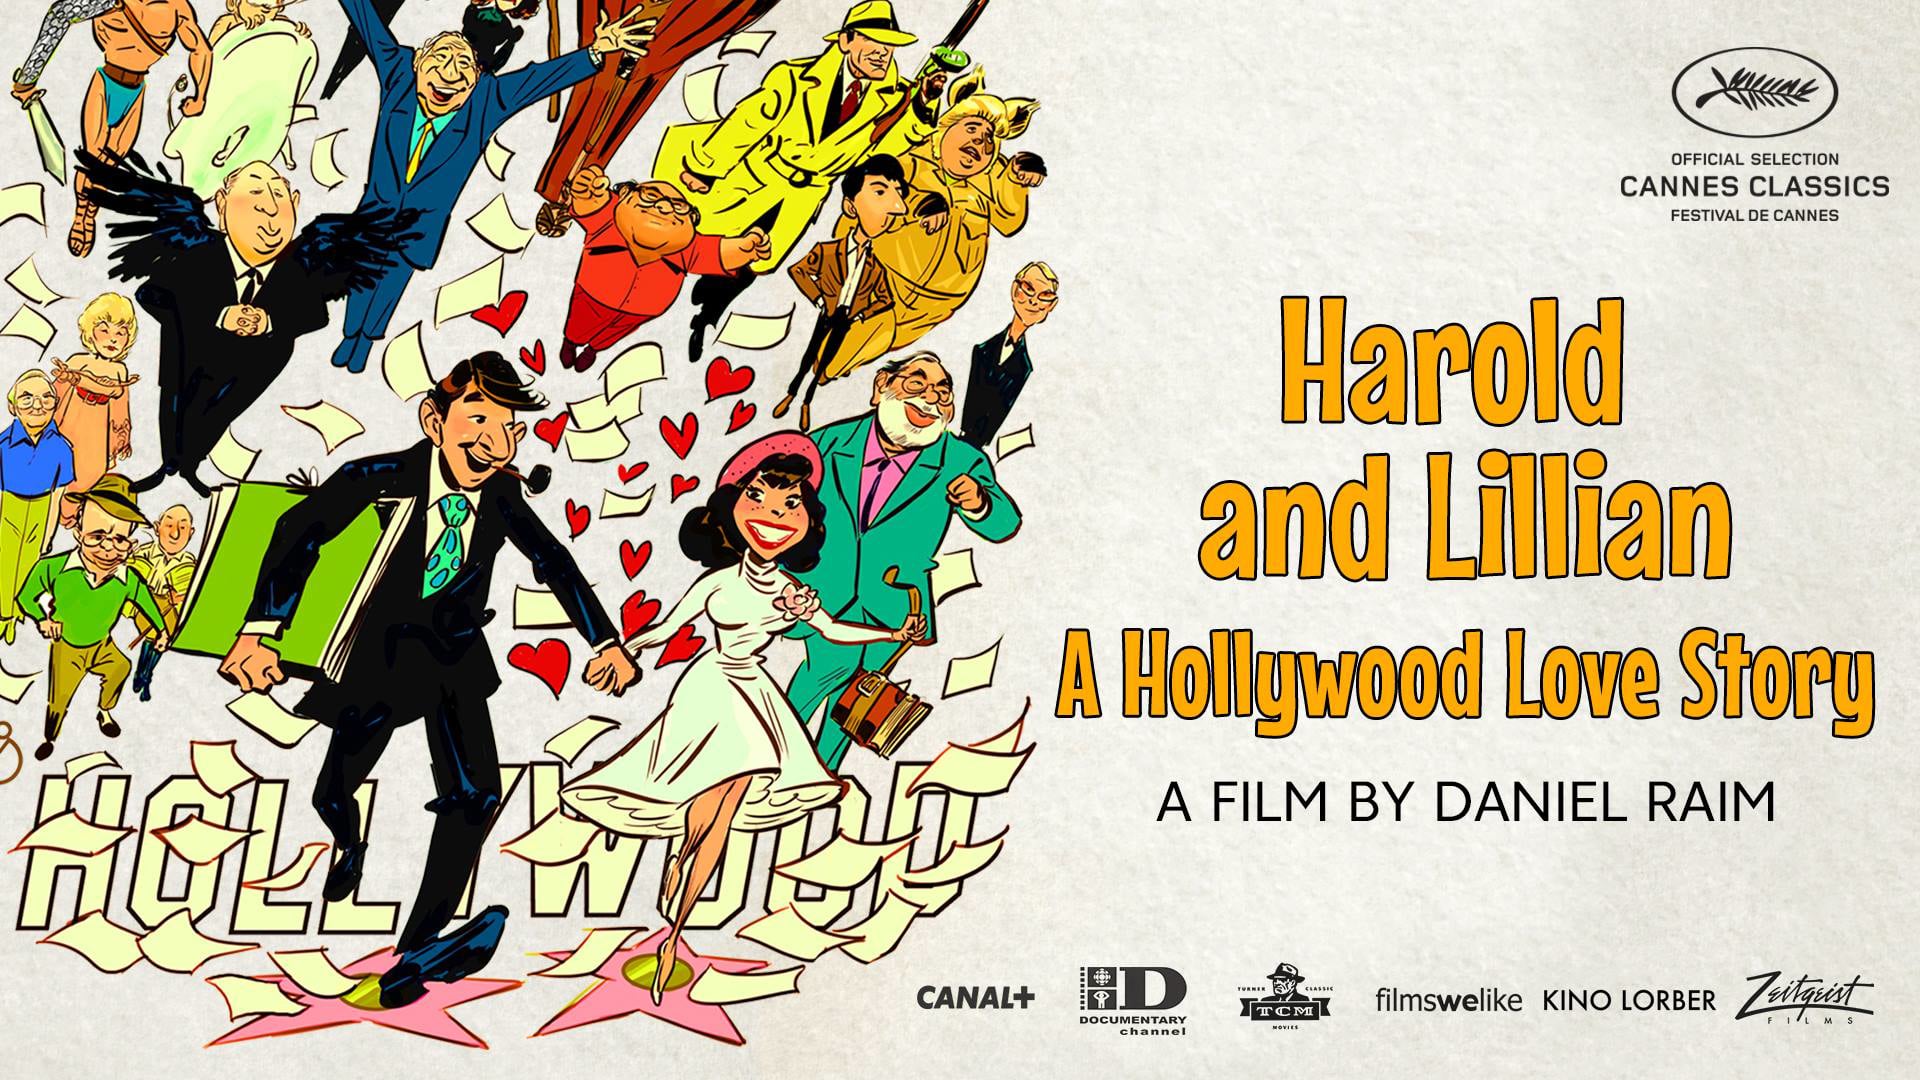 Watch HAROLD AND LILLIAN A HOLLYWOOD LOVE STORY Online Vimeo On Demand on Vimeo